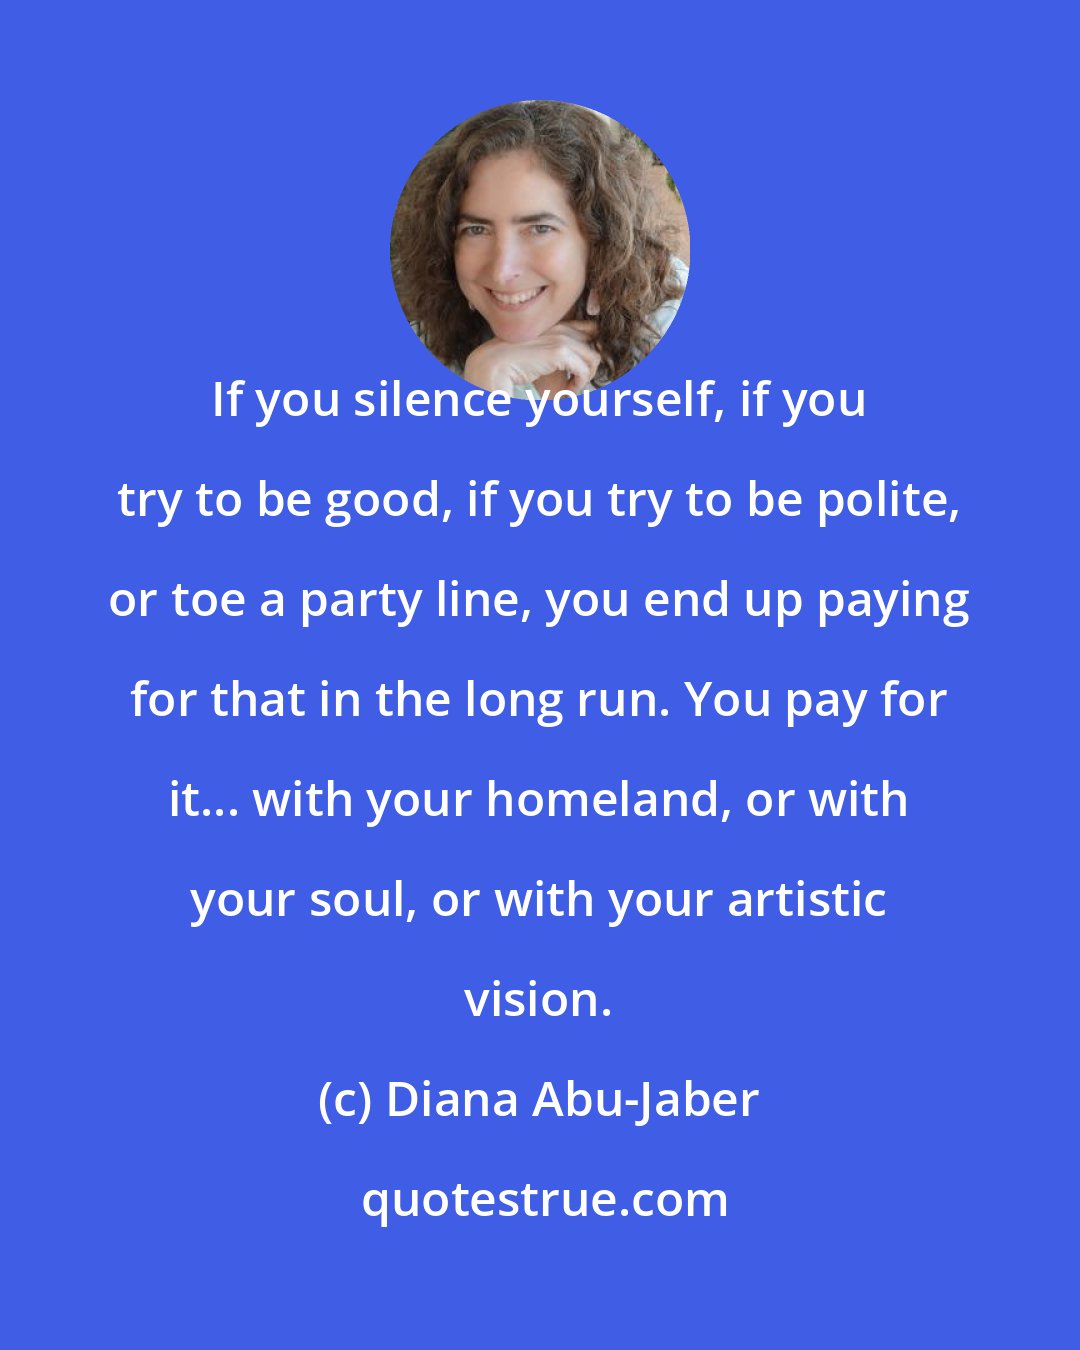 Diana Abu-Jaber: If you silence yourself, if you try to be good, if you try to be polite, or toe a party line, you end up paying for that in the long run. You pay for it... with your homeland, or with your soul, or with your artistic vision.